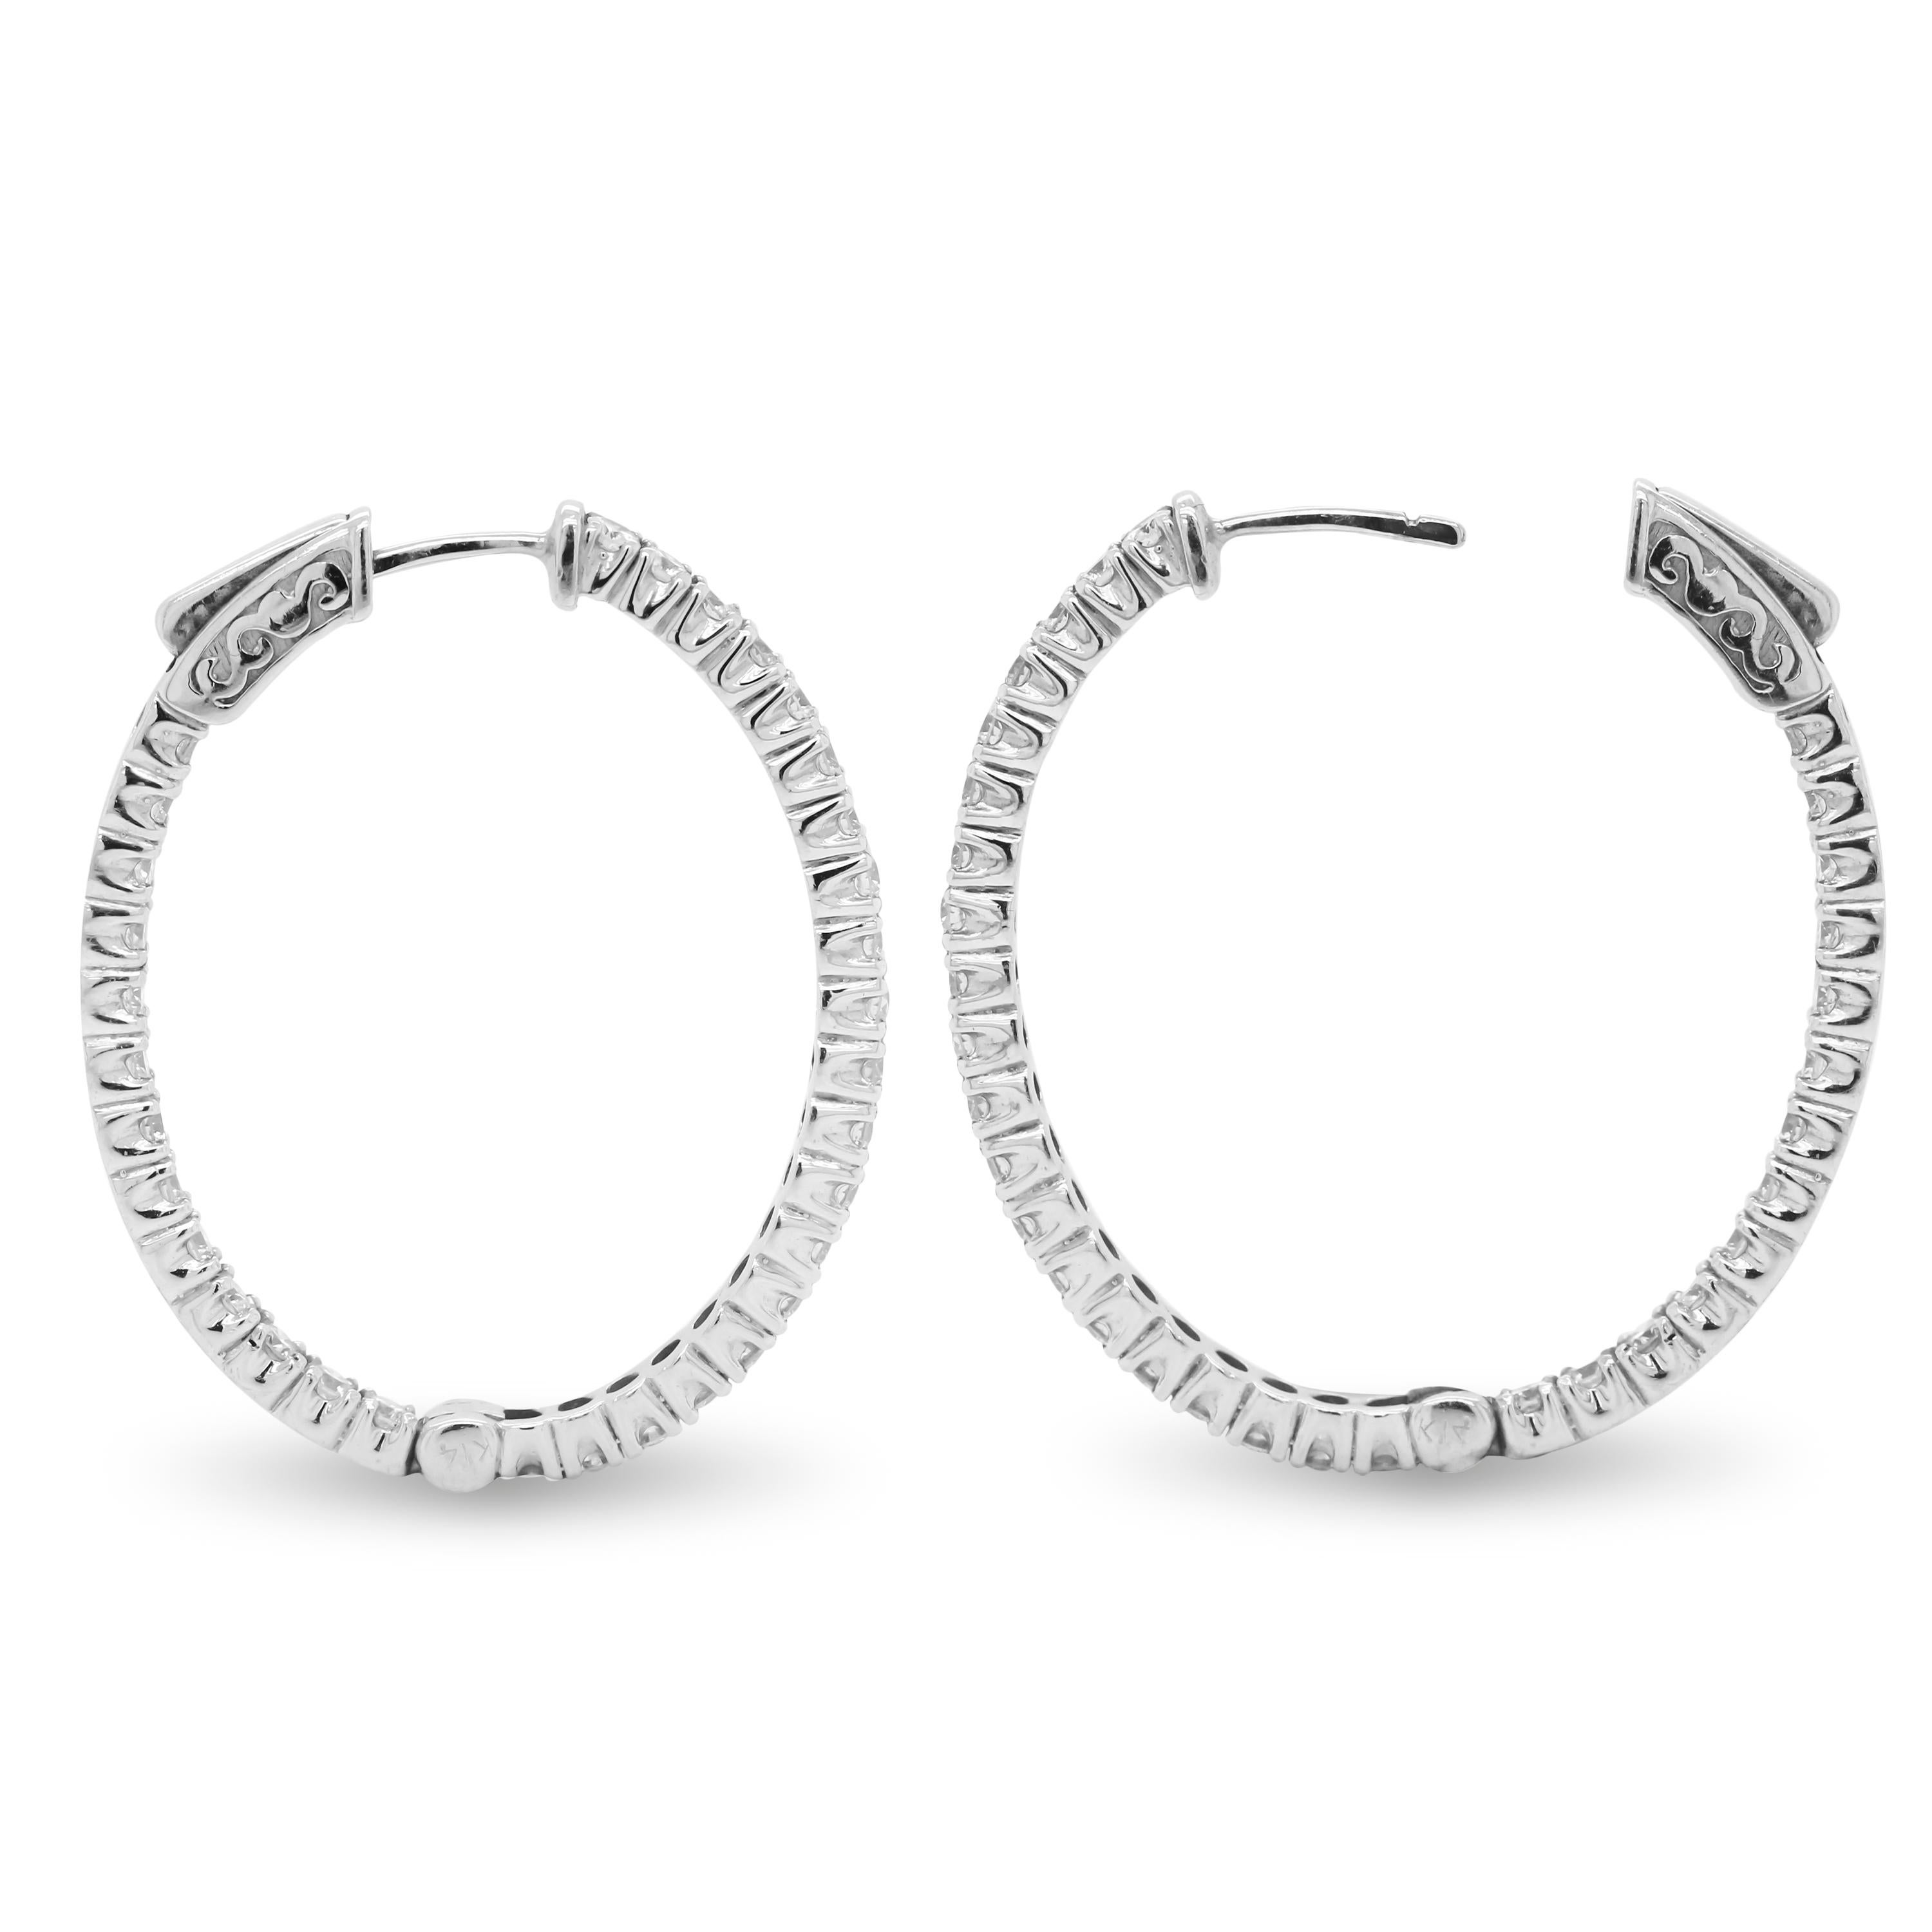 14k White Gold Oval Shape Hoop Earrings with 2.25 Carat Diamonds

A staple in every wardrobe, the traditional, yet elegant, diamond hoops.

Apprx. 2.25 carat G-H color, VS-SI clarity diamonds 

28.55mm oval diameter